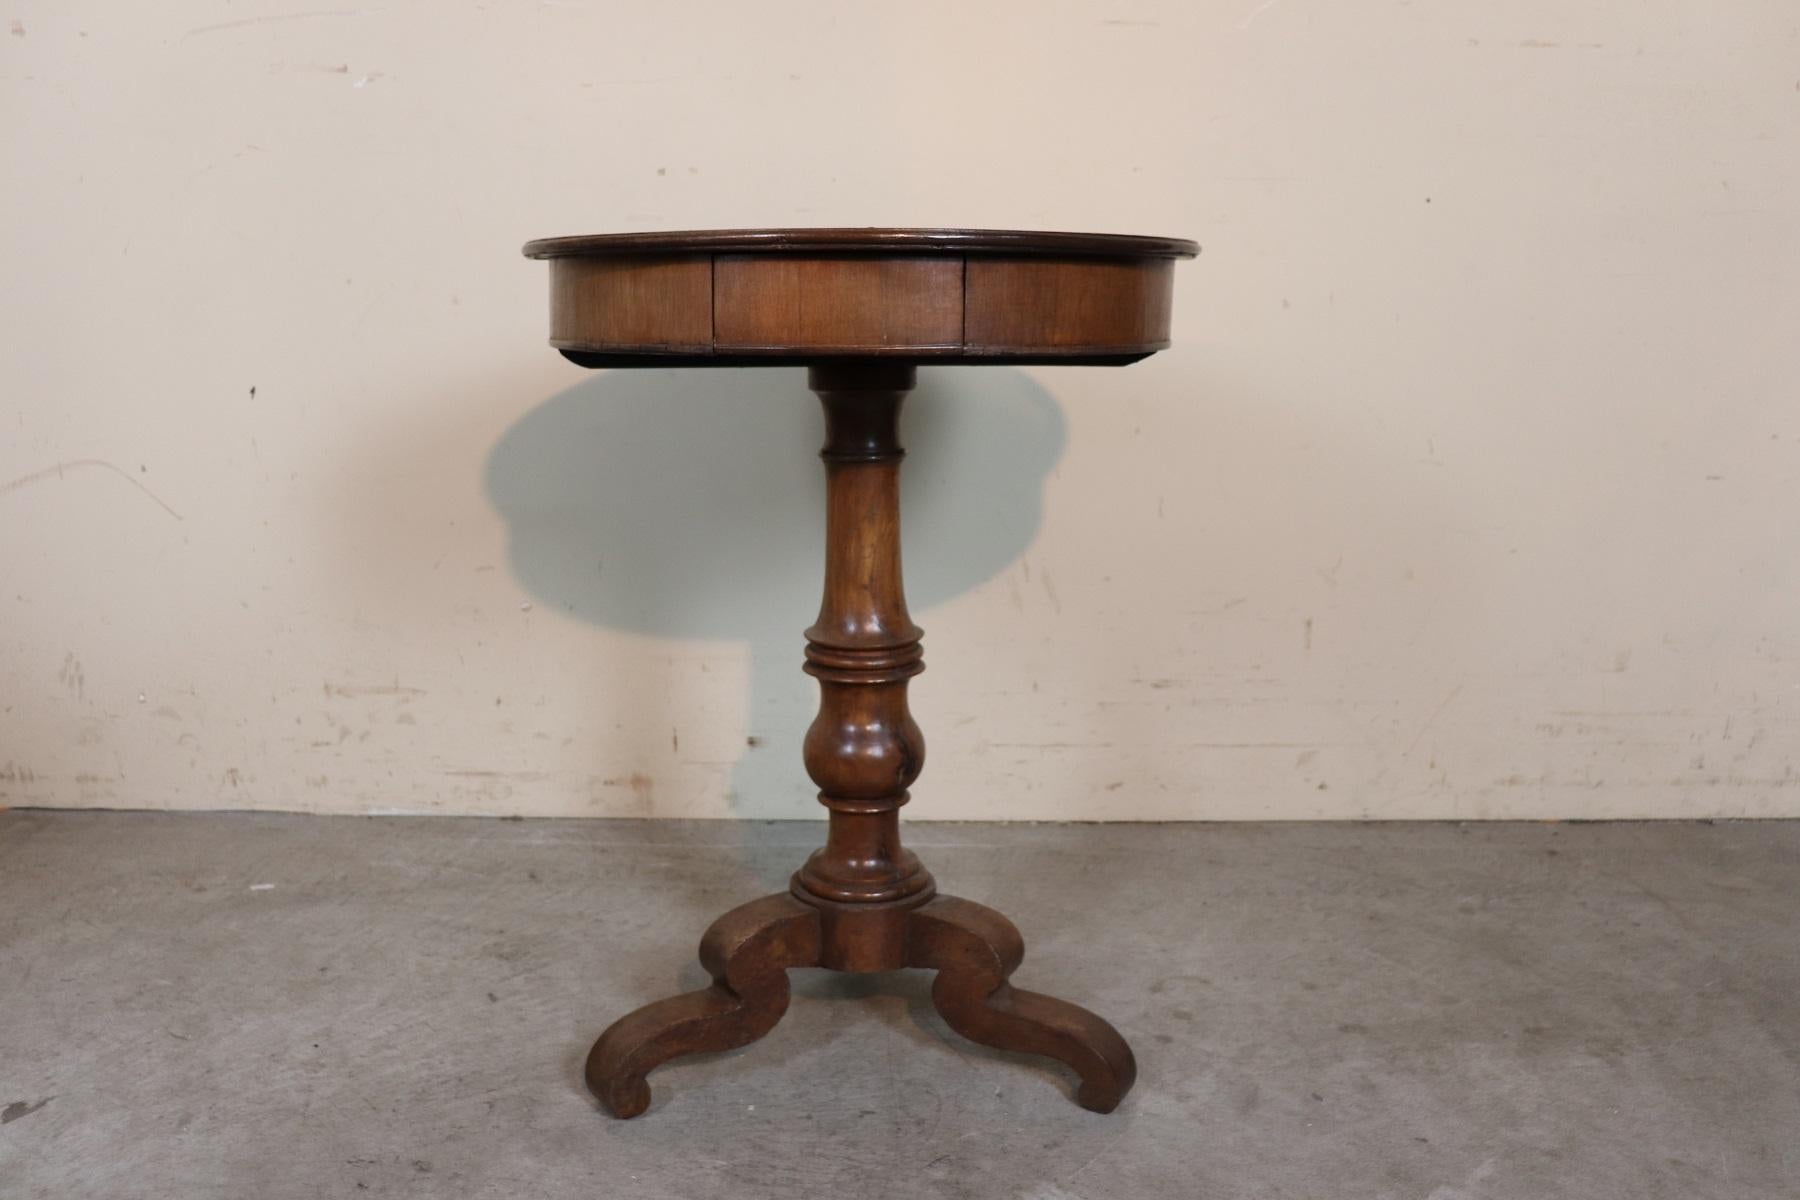 Beautiful important antique round side table 1845s in walnut. Table with elegant turned central leg. Small and practical drawer. Often these small tables were used in the Italian salons of wealthy families to display all the photographs.
The